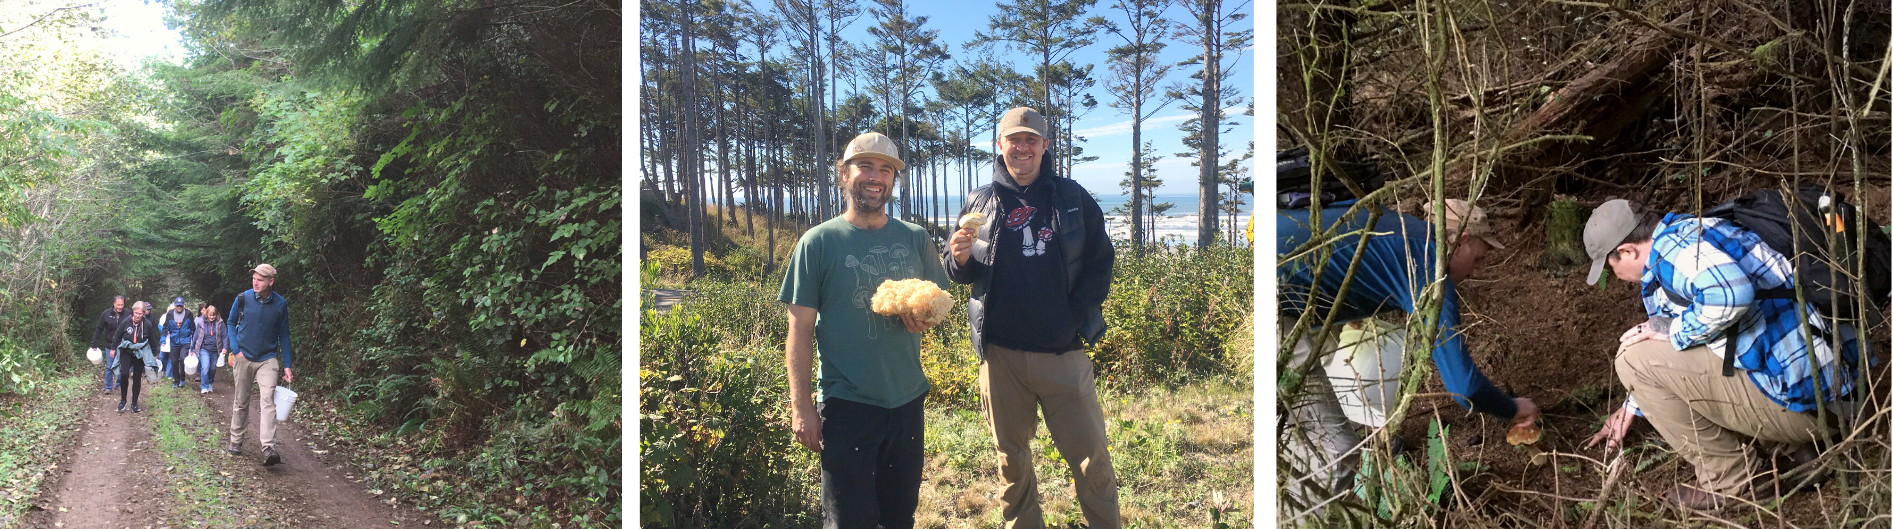 A Successful Mushroom Foraging Experience In Seabrook